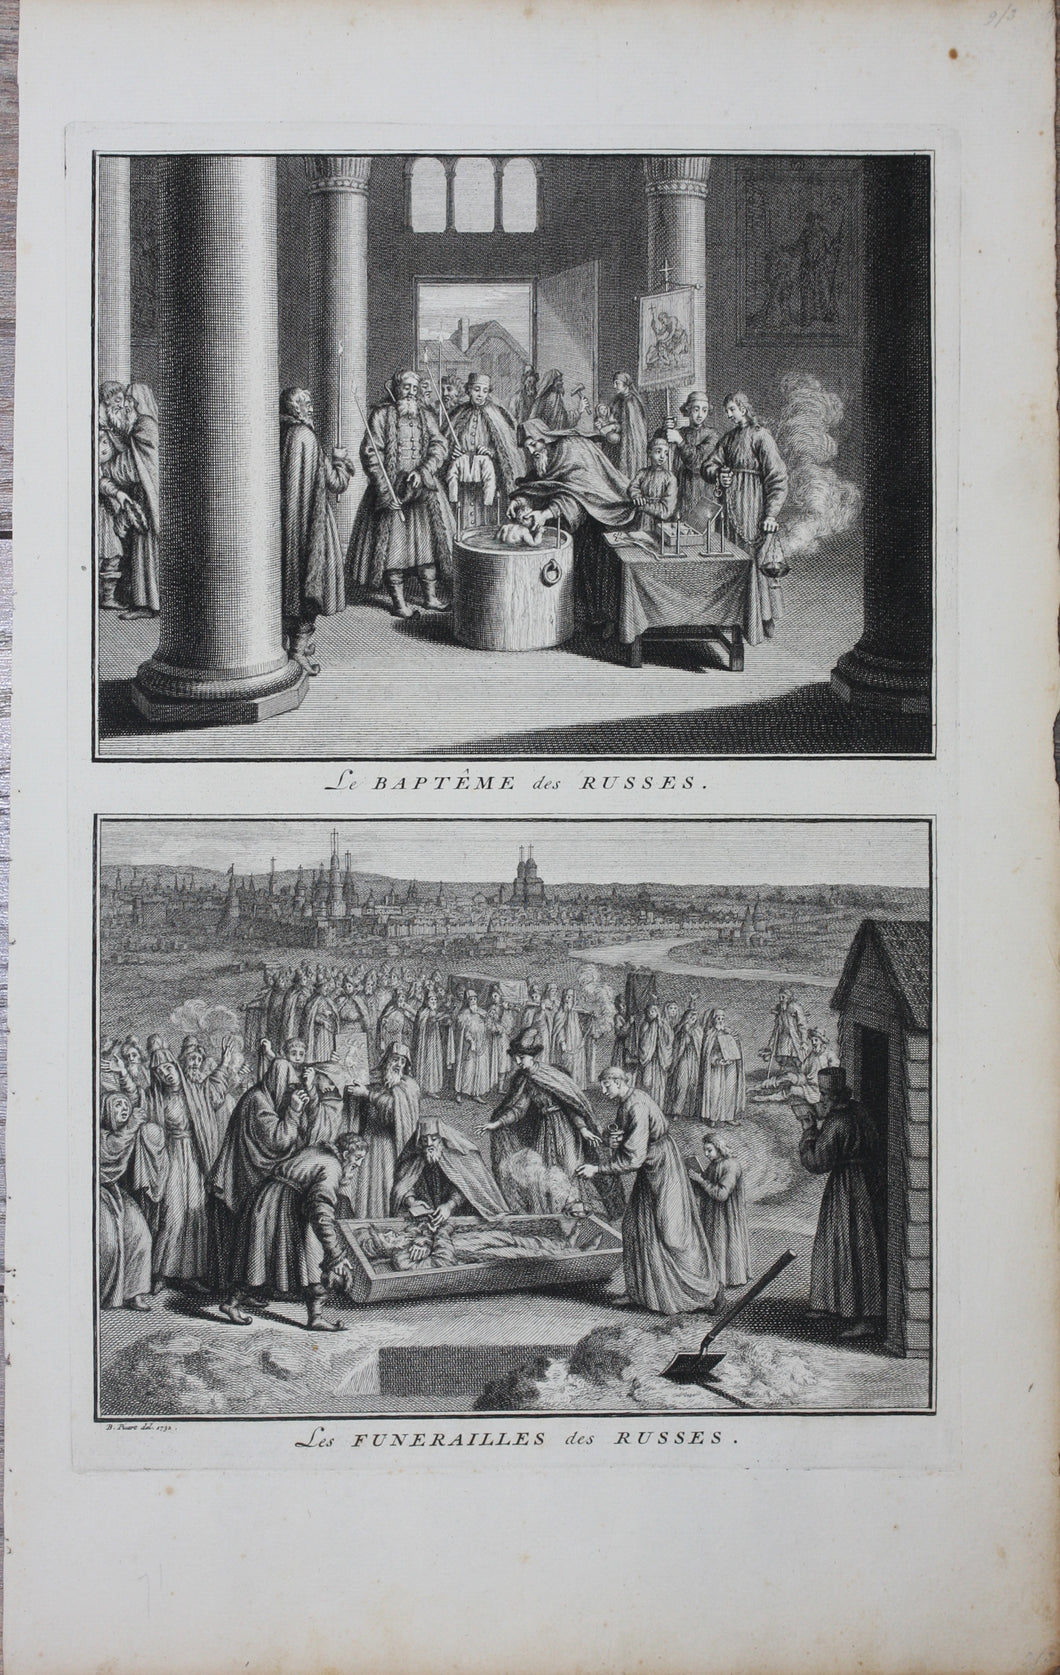 Bernard Picart. The Baptism of the Russians. Russian funeral. Engraving. 1732.